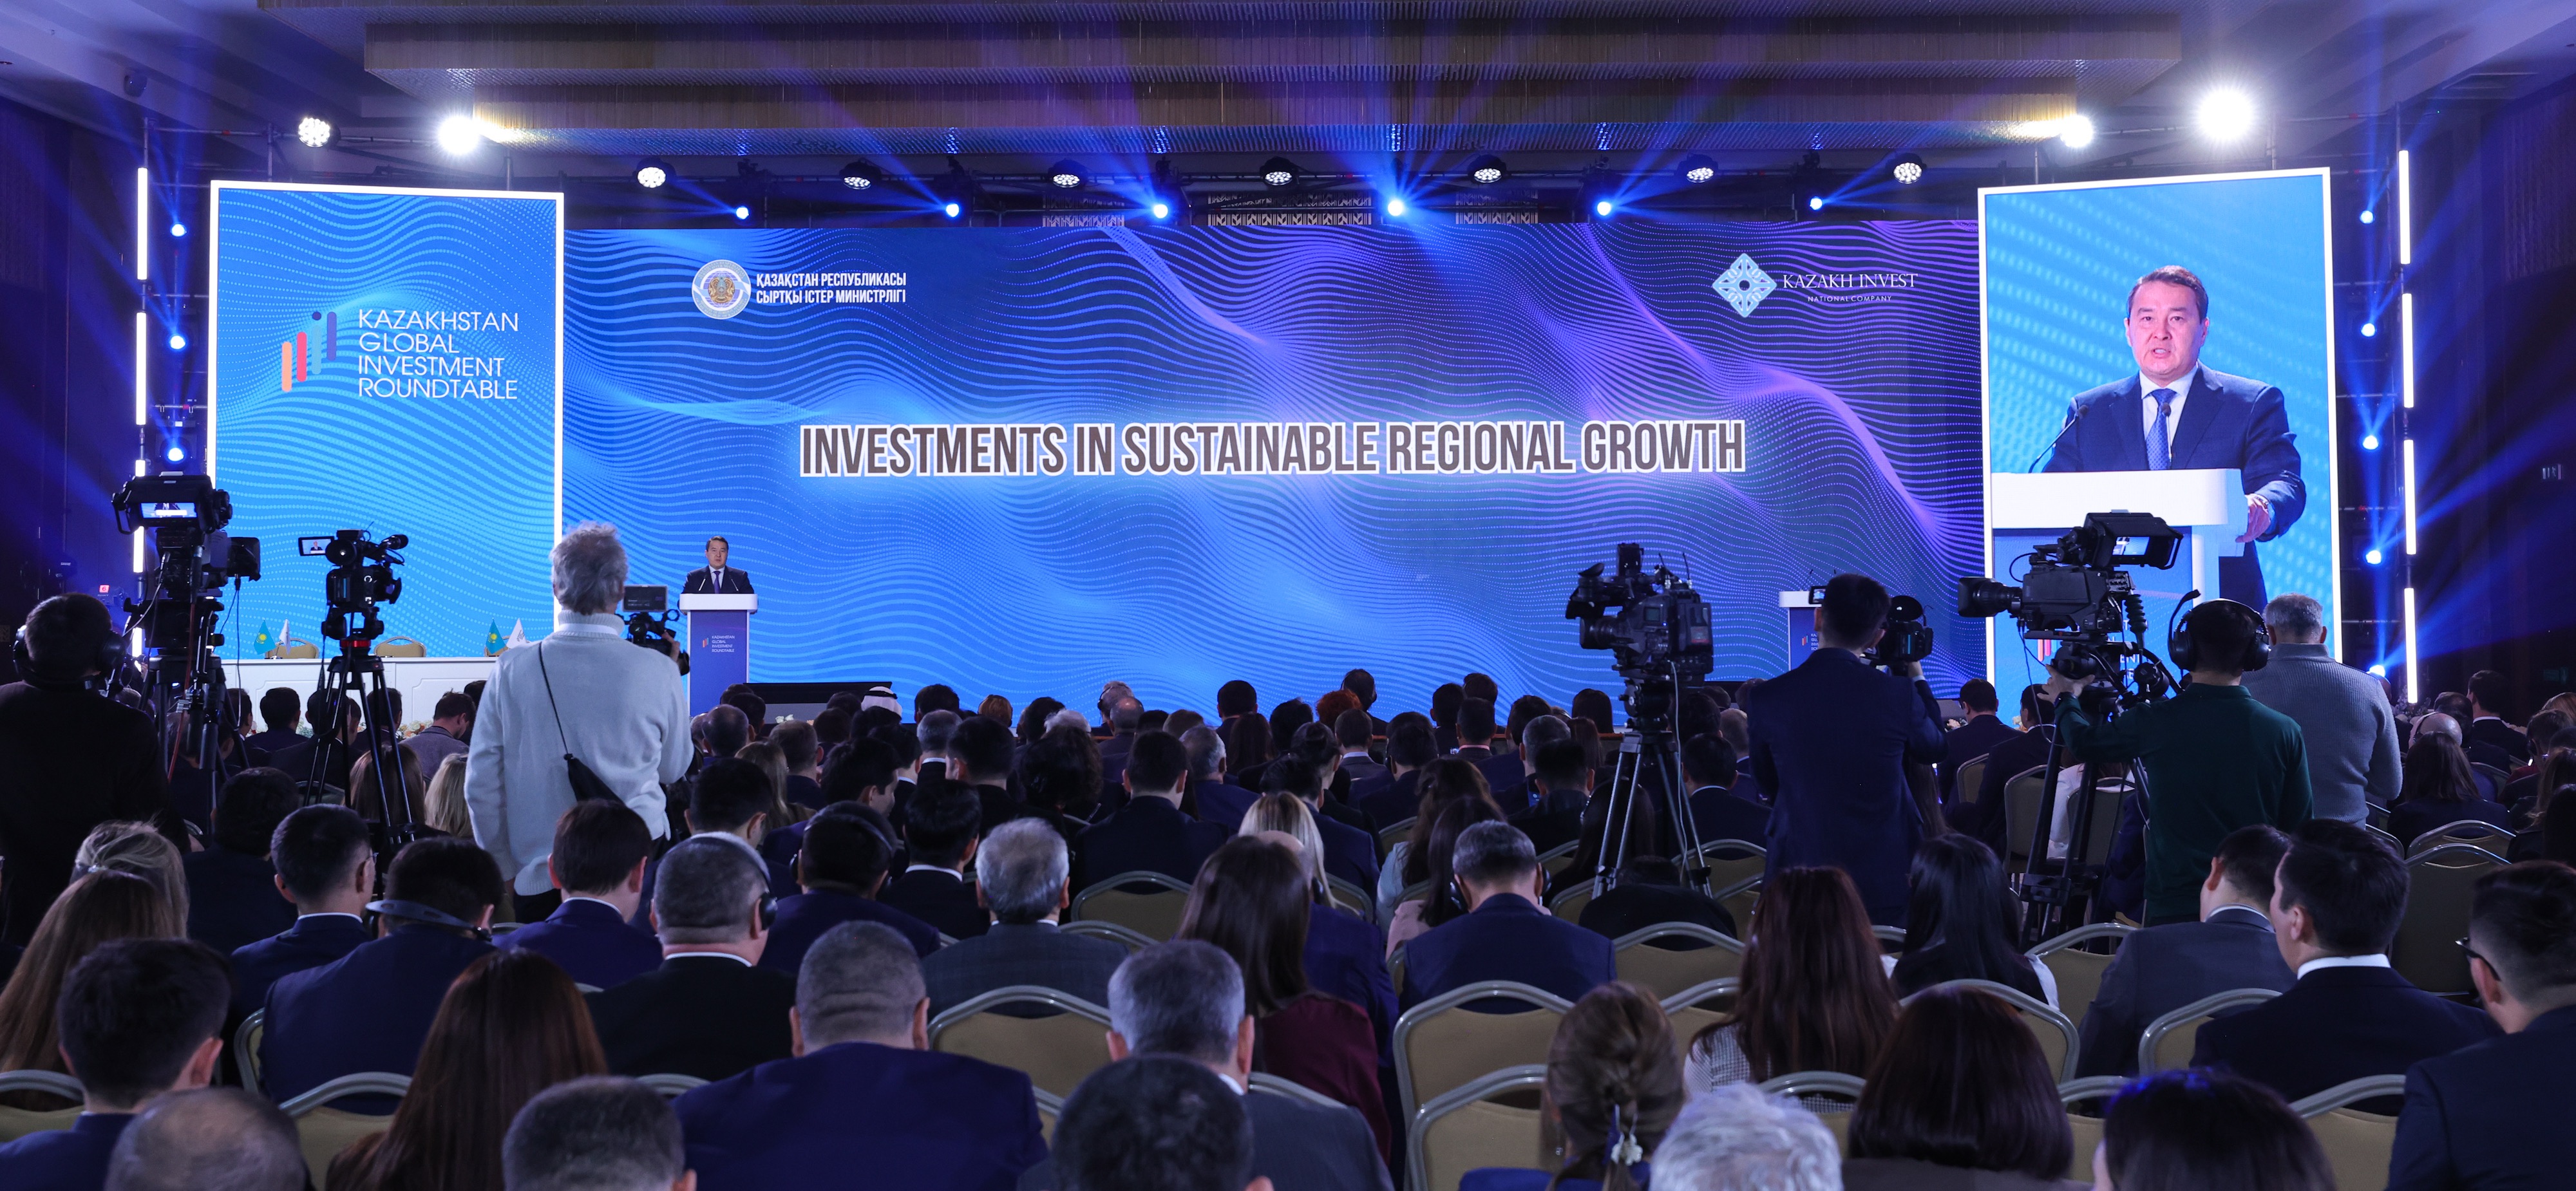 Kazakhstan aims to attract $150bn in foreign investment by 2029  